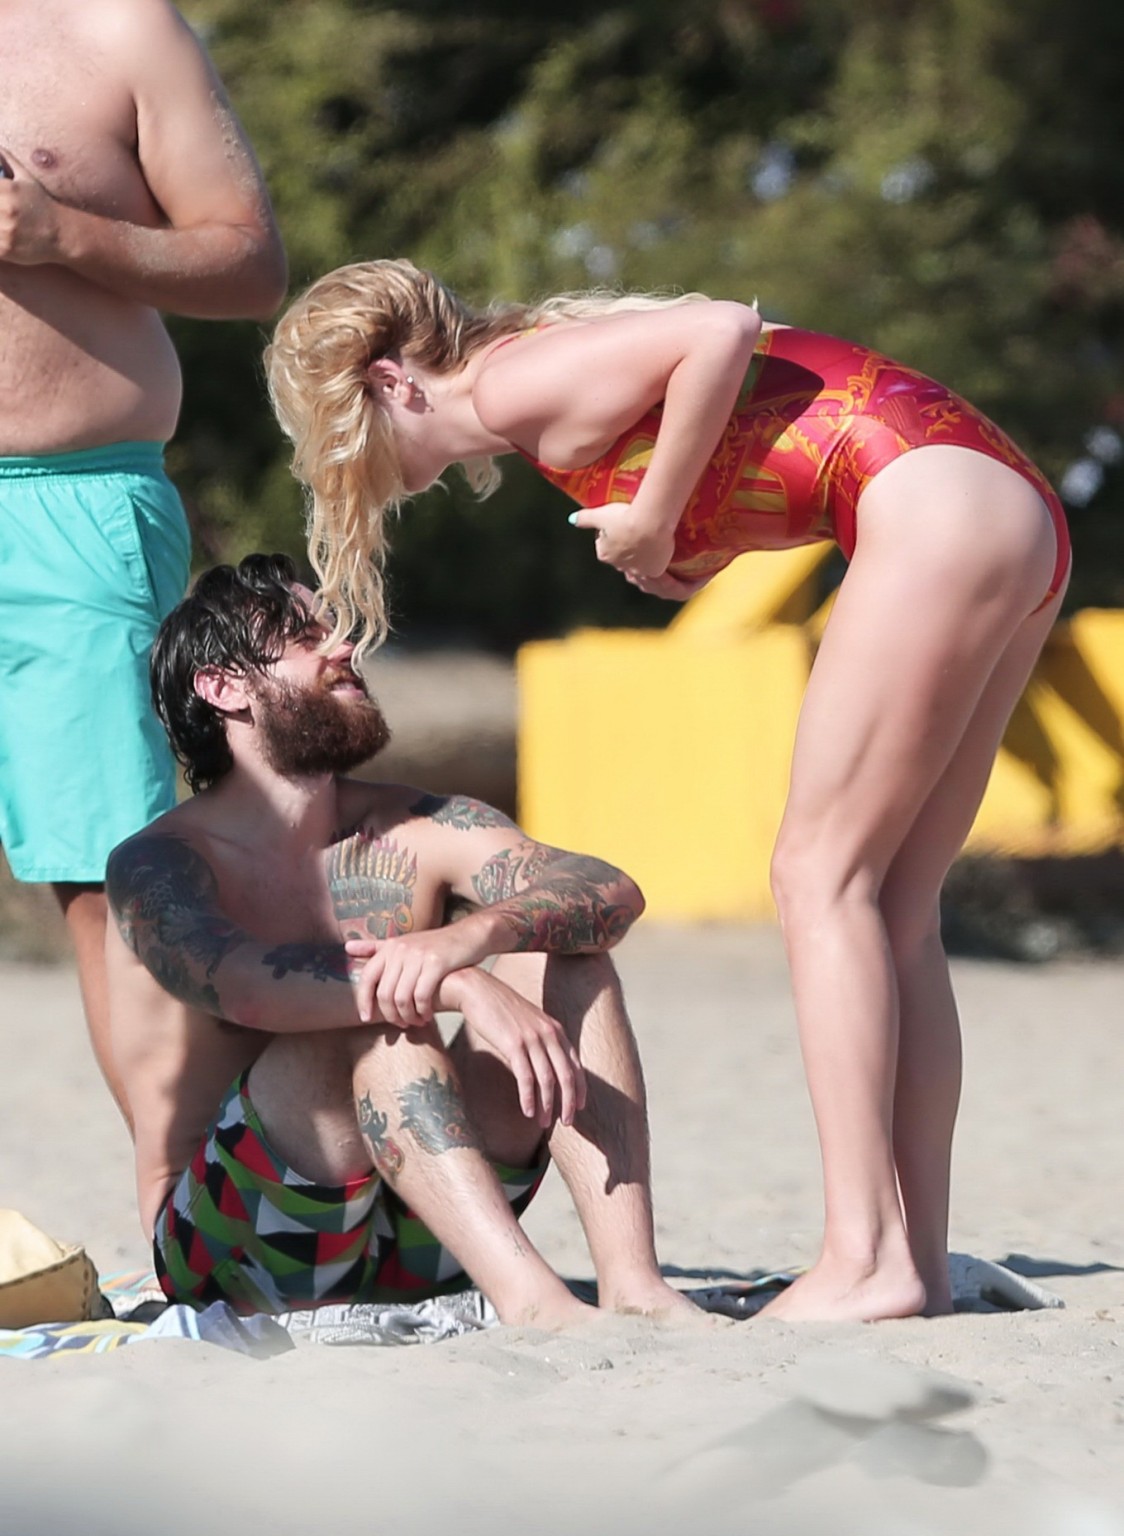 Kesha Sebert busty and booty in a red plunging swimsuit at the beach in Malibu #75187028